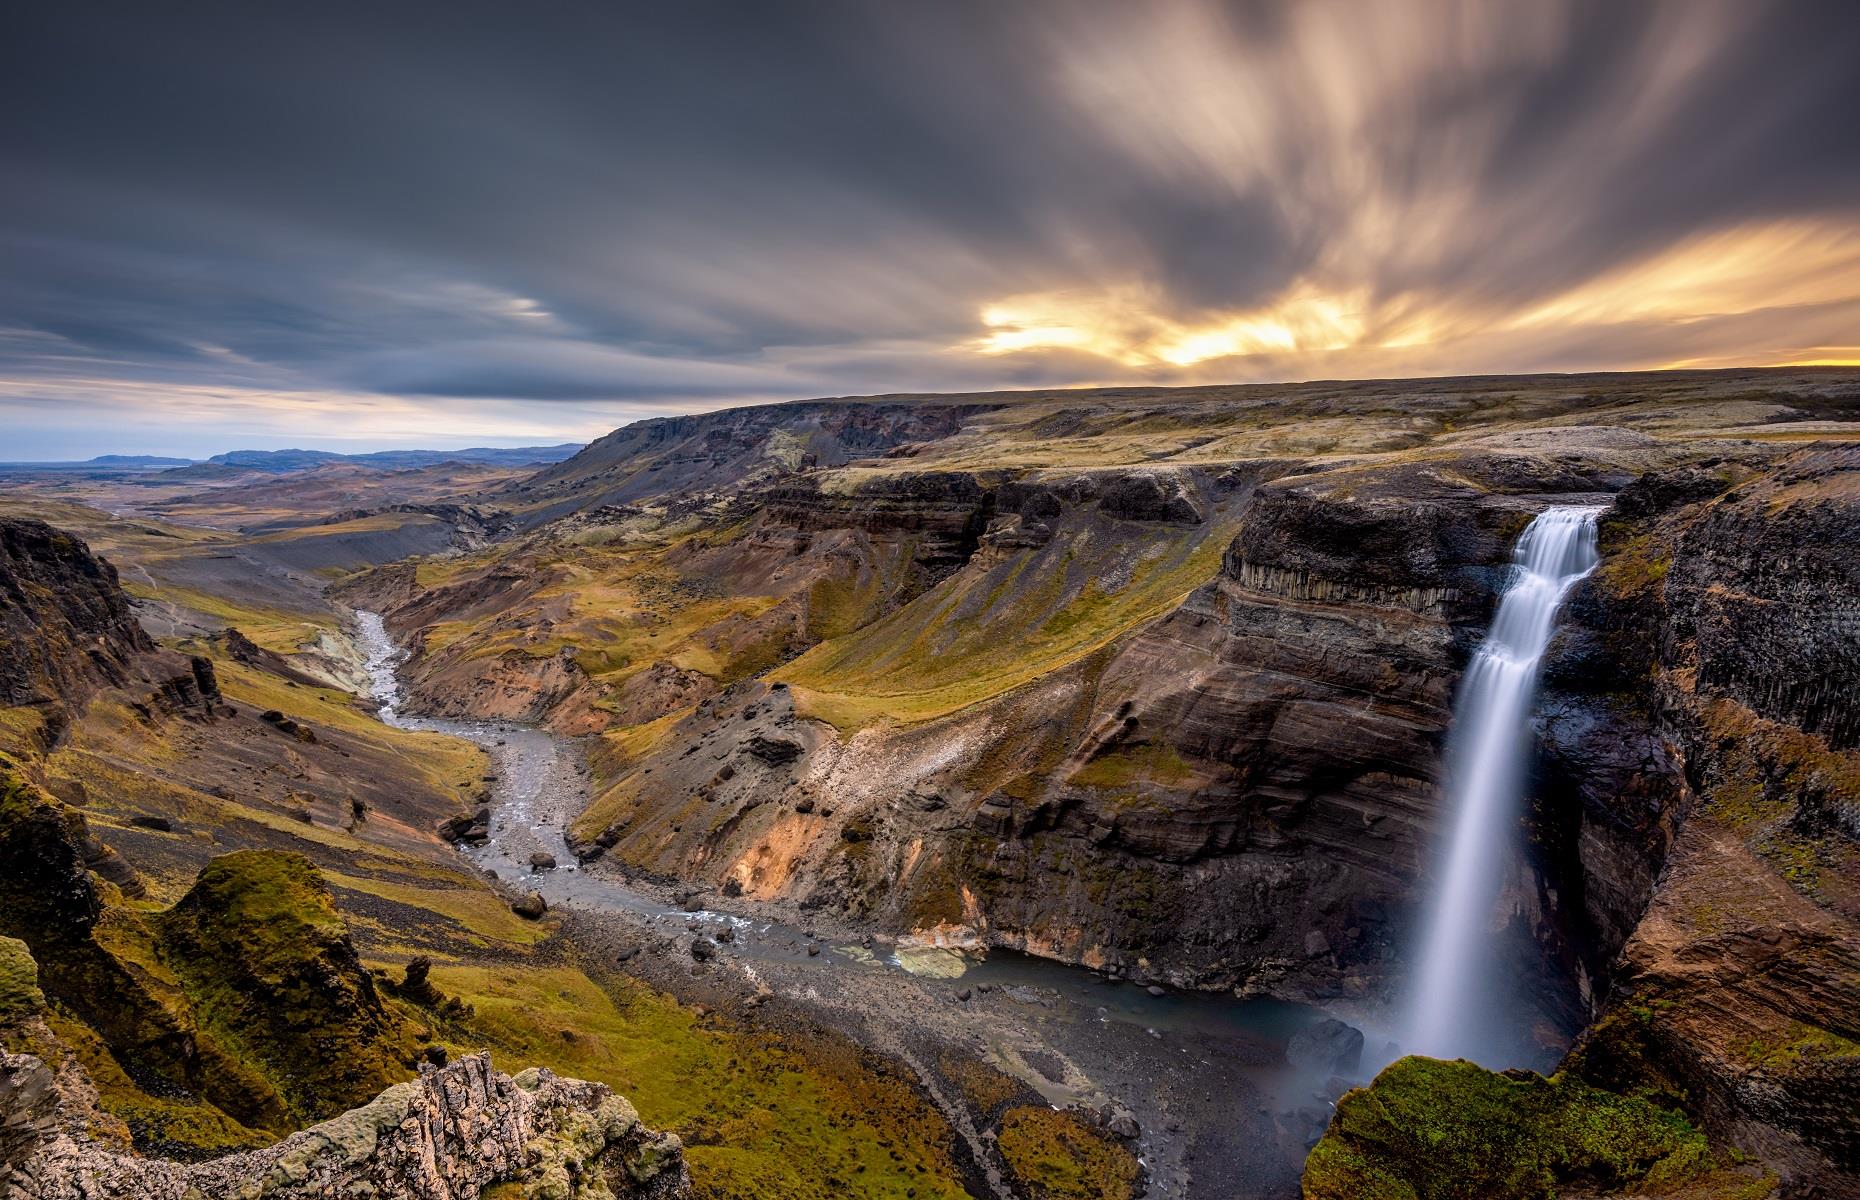 <p>On the edge of the Icelandic highlands, you'll find the country's third tallest waterfall. Háifoss, or the Tall Falls, soars up over 400 feet (122m) and can be found right next to Granni waterfall, resulting in one of the most beautiful landscapes in all of Iceland. Head to Fossárdalur valley to soak up the scenery, or take a hike to the top of the falls to witness its power from an altogether more dramatic angle.</p>